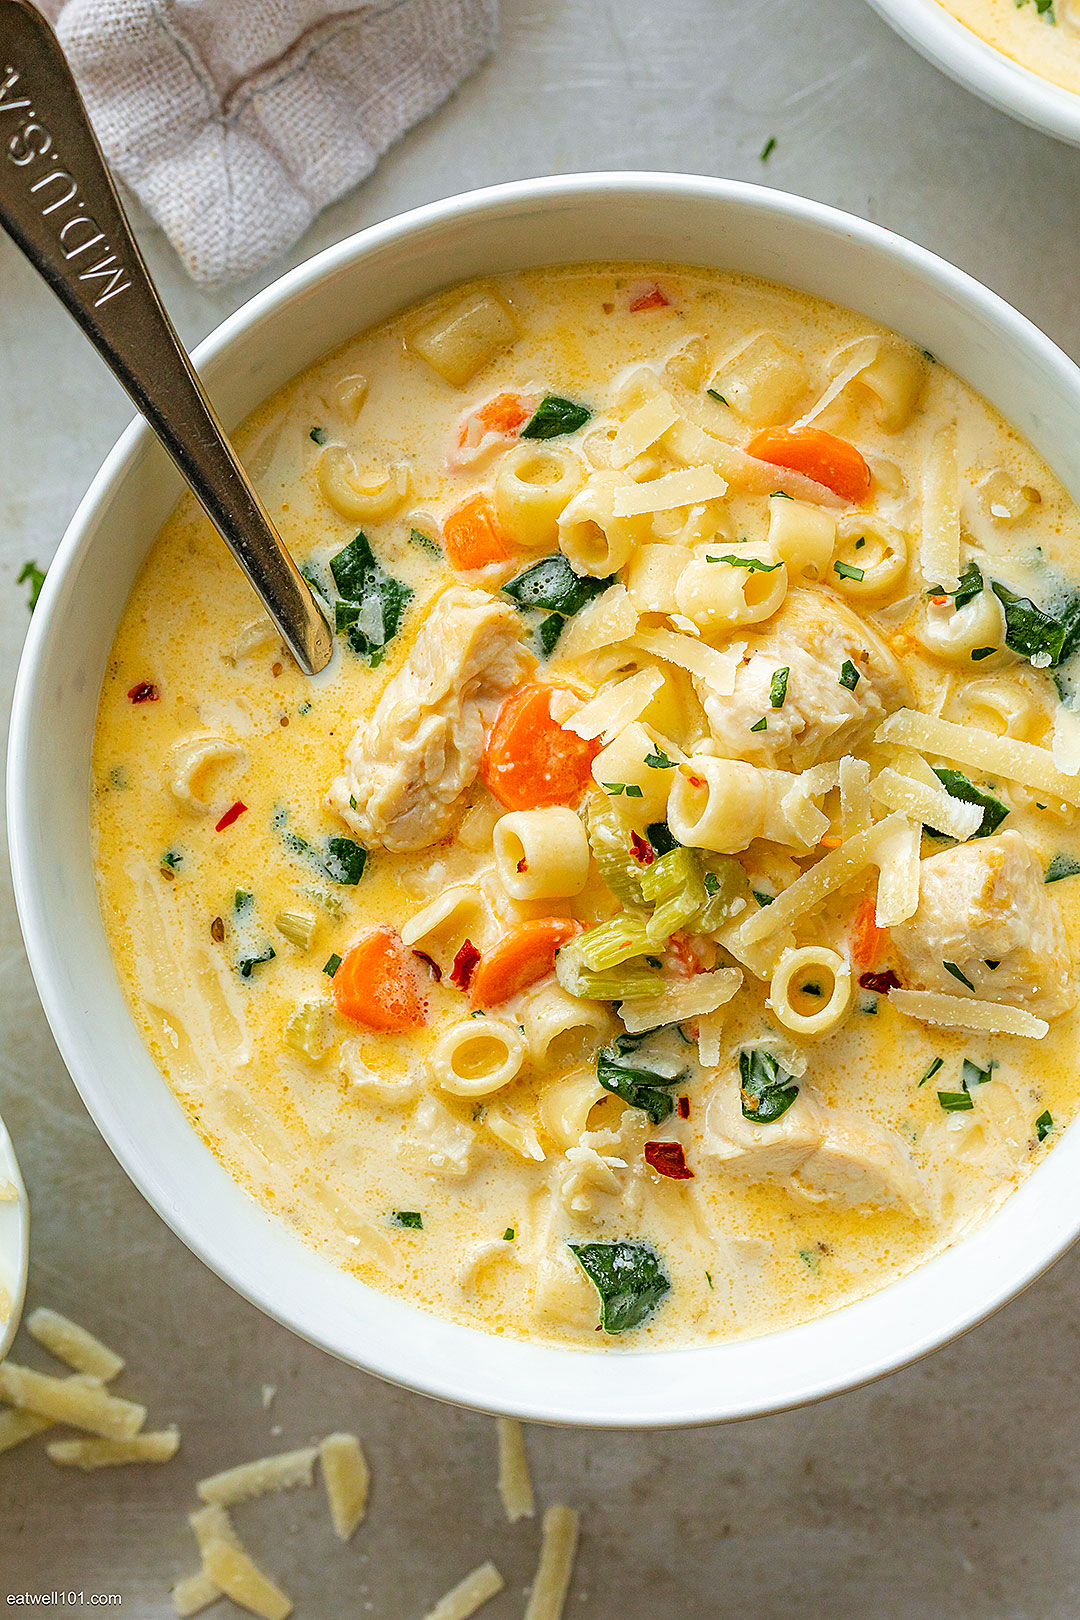 Creamy Chicken Pasta Soup Recipe With Carrot And Spinach Best Chicken Noodle Soup Recipe Eatwell101